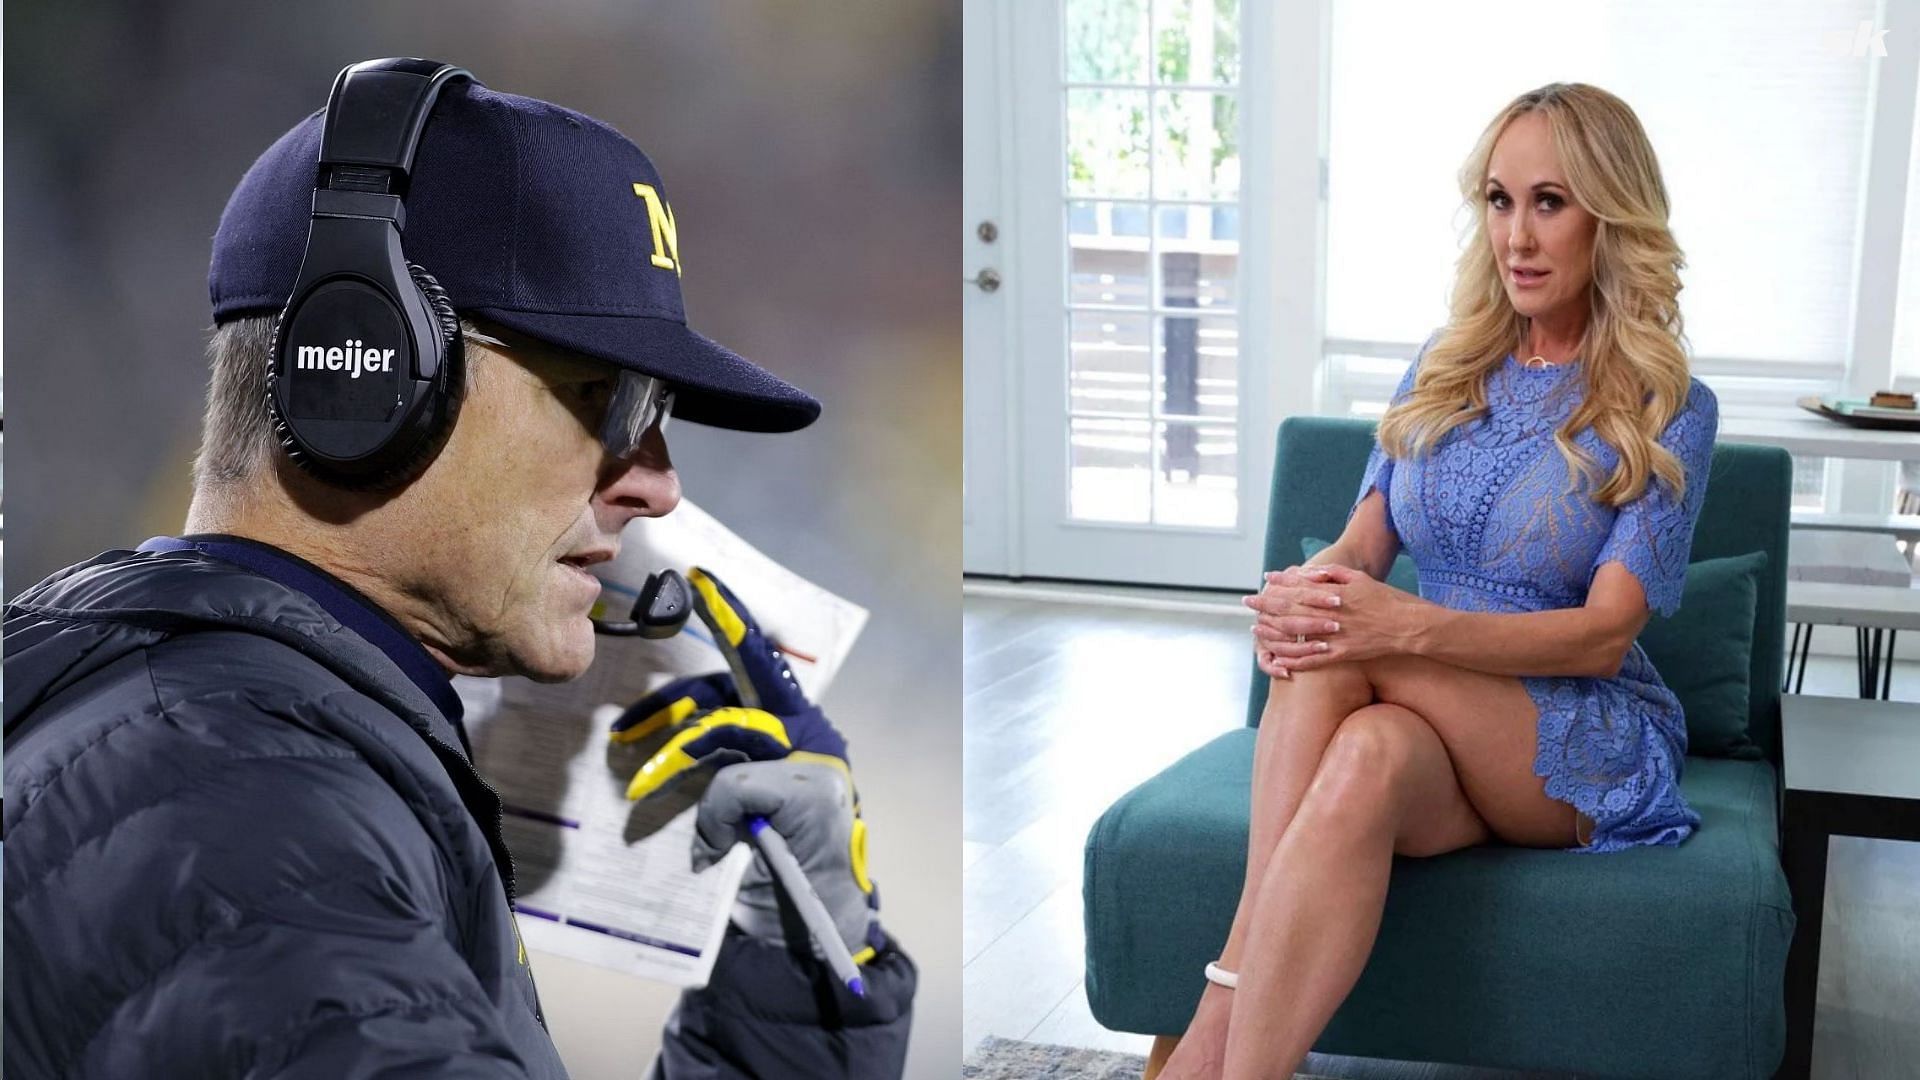 Porn actress Brandi Love couldn't help but throw her two cents into the  College Football Playoff controversy